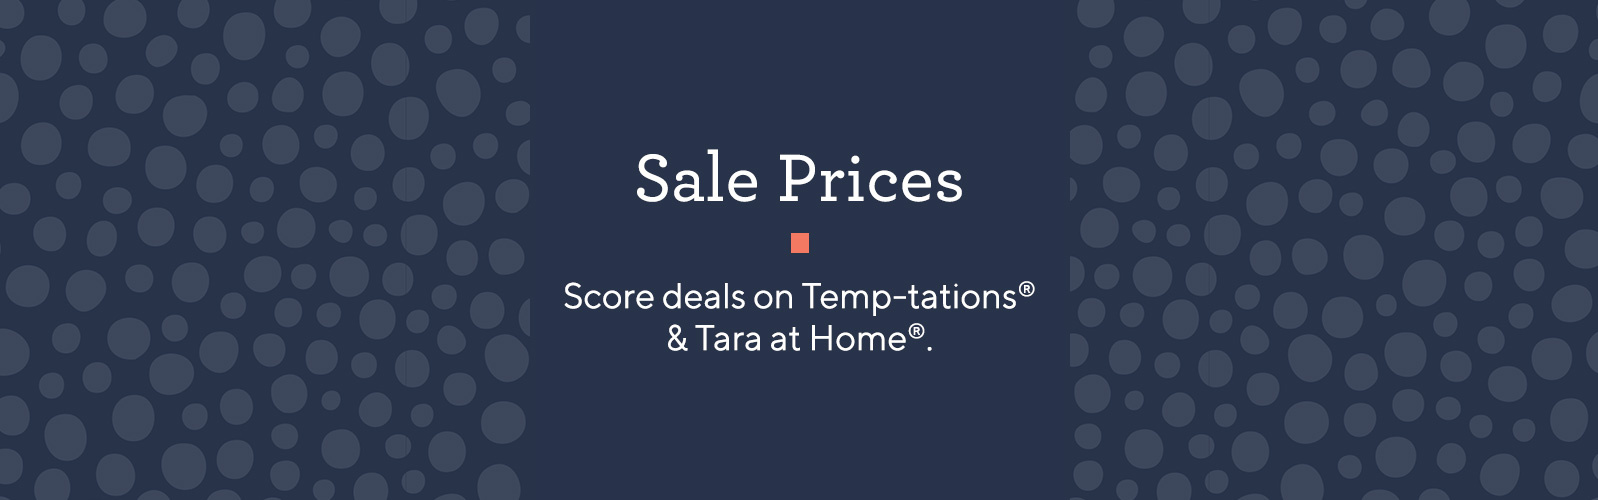 Sale Prices  Score deals on Temp-tations® & Tara at Home®.